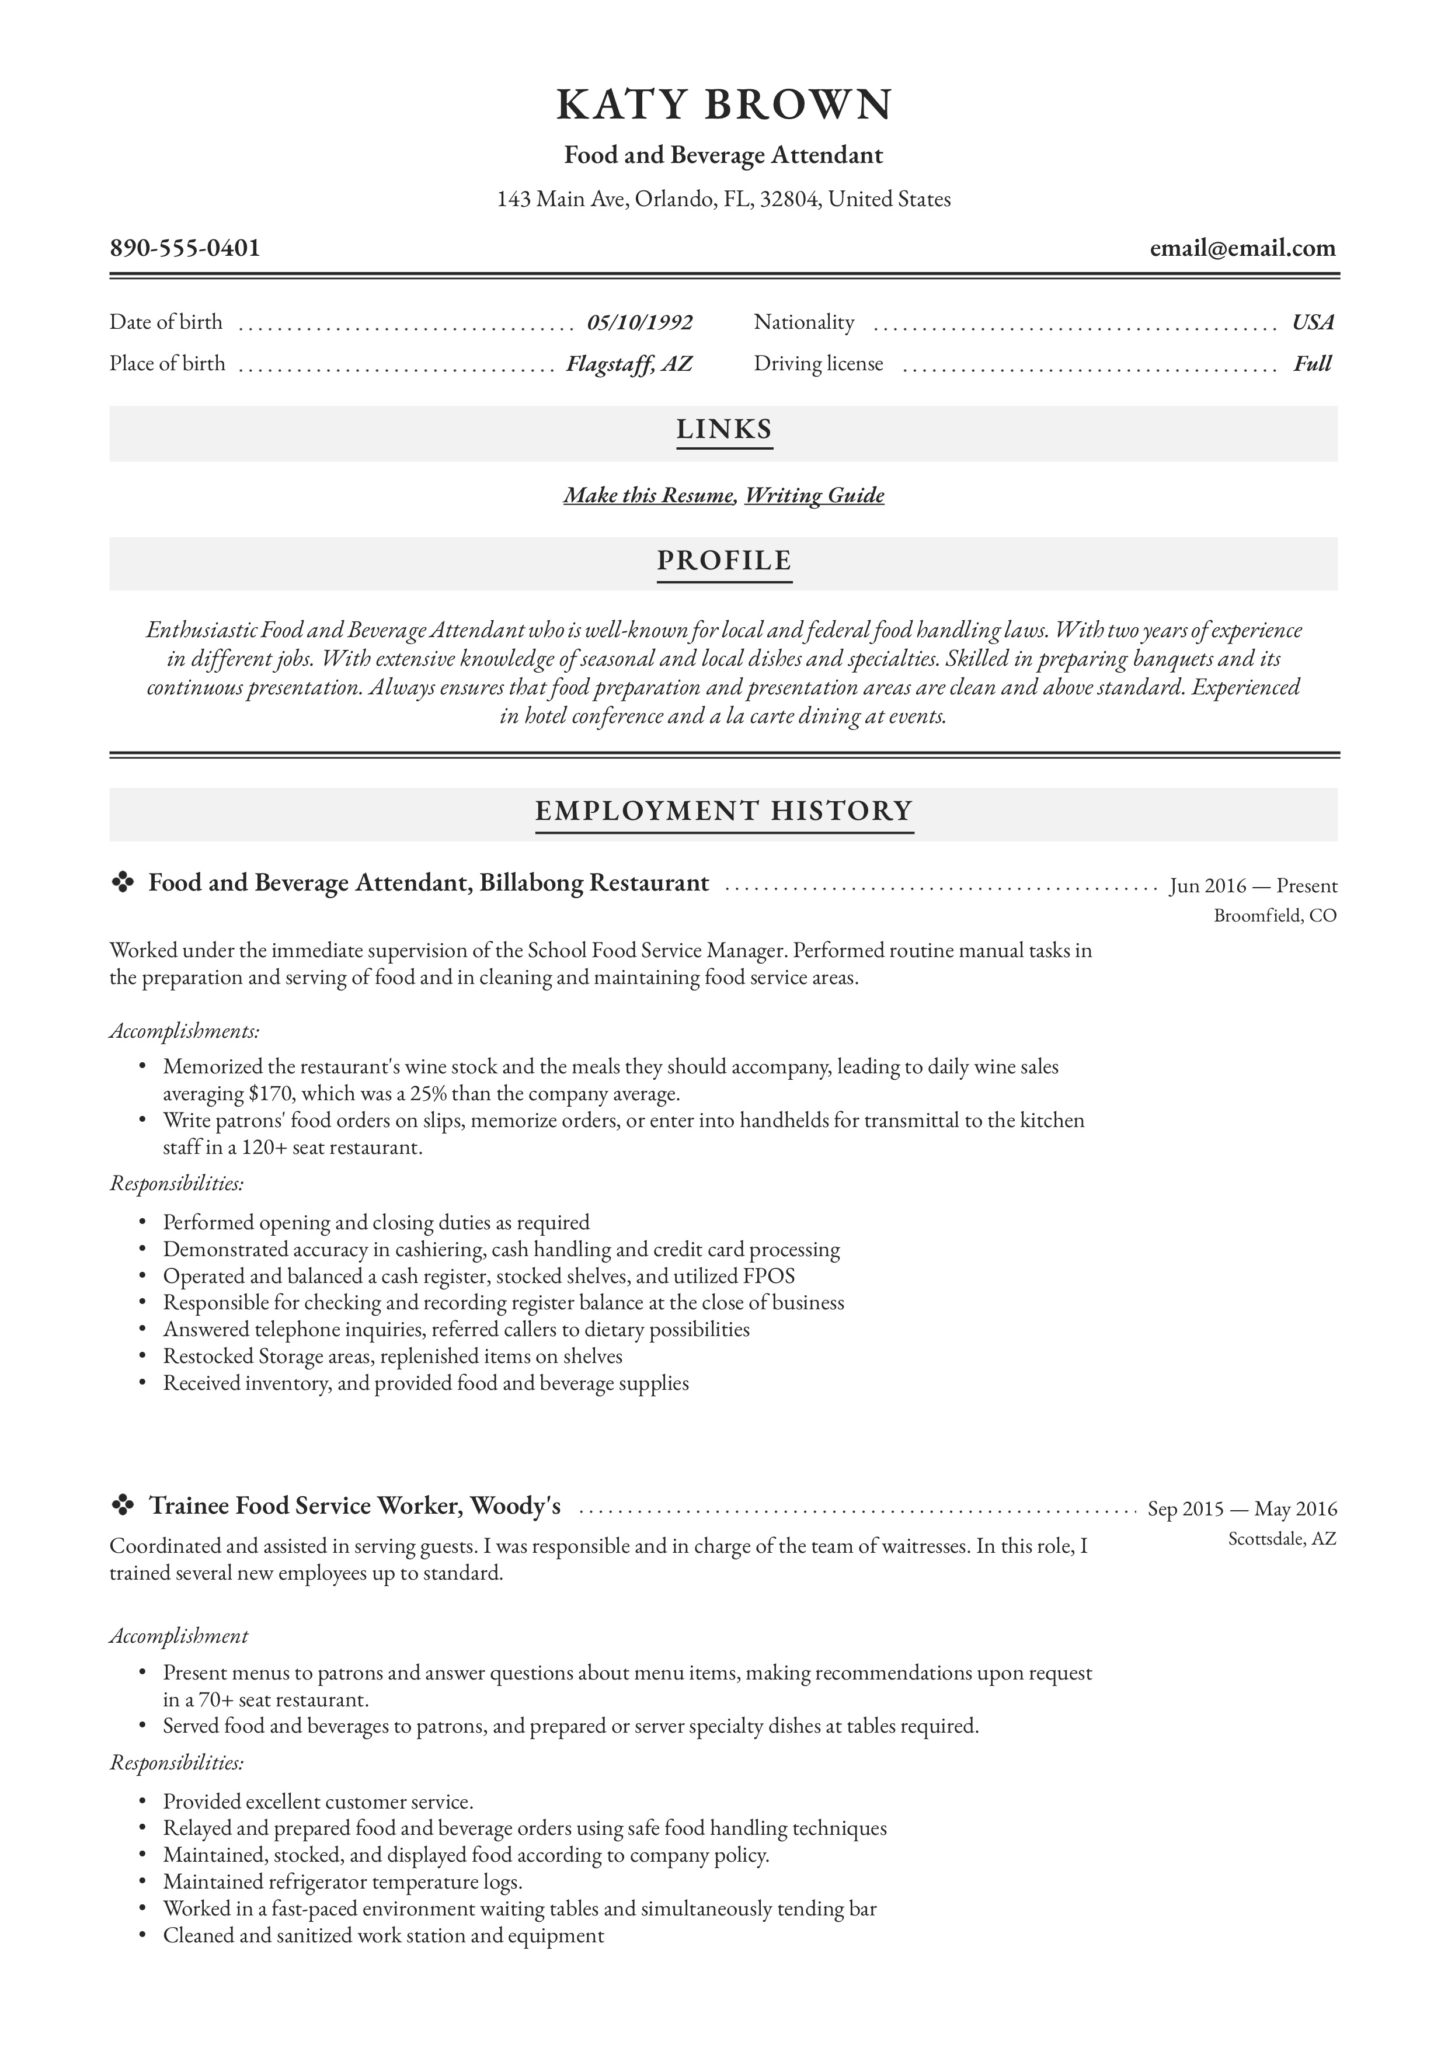 Resume Food and Beverage Attendant (10)